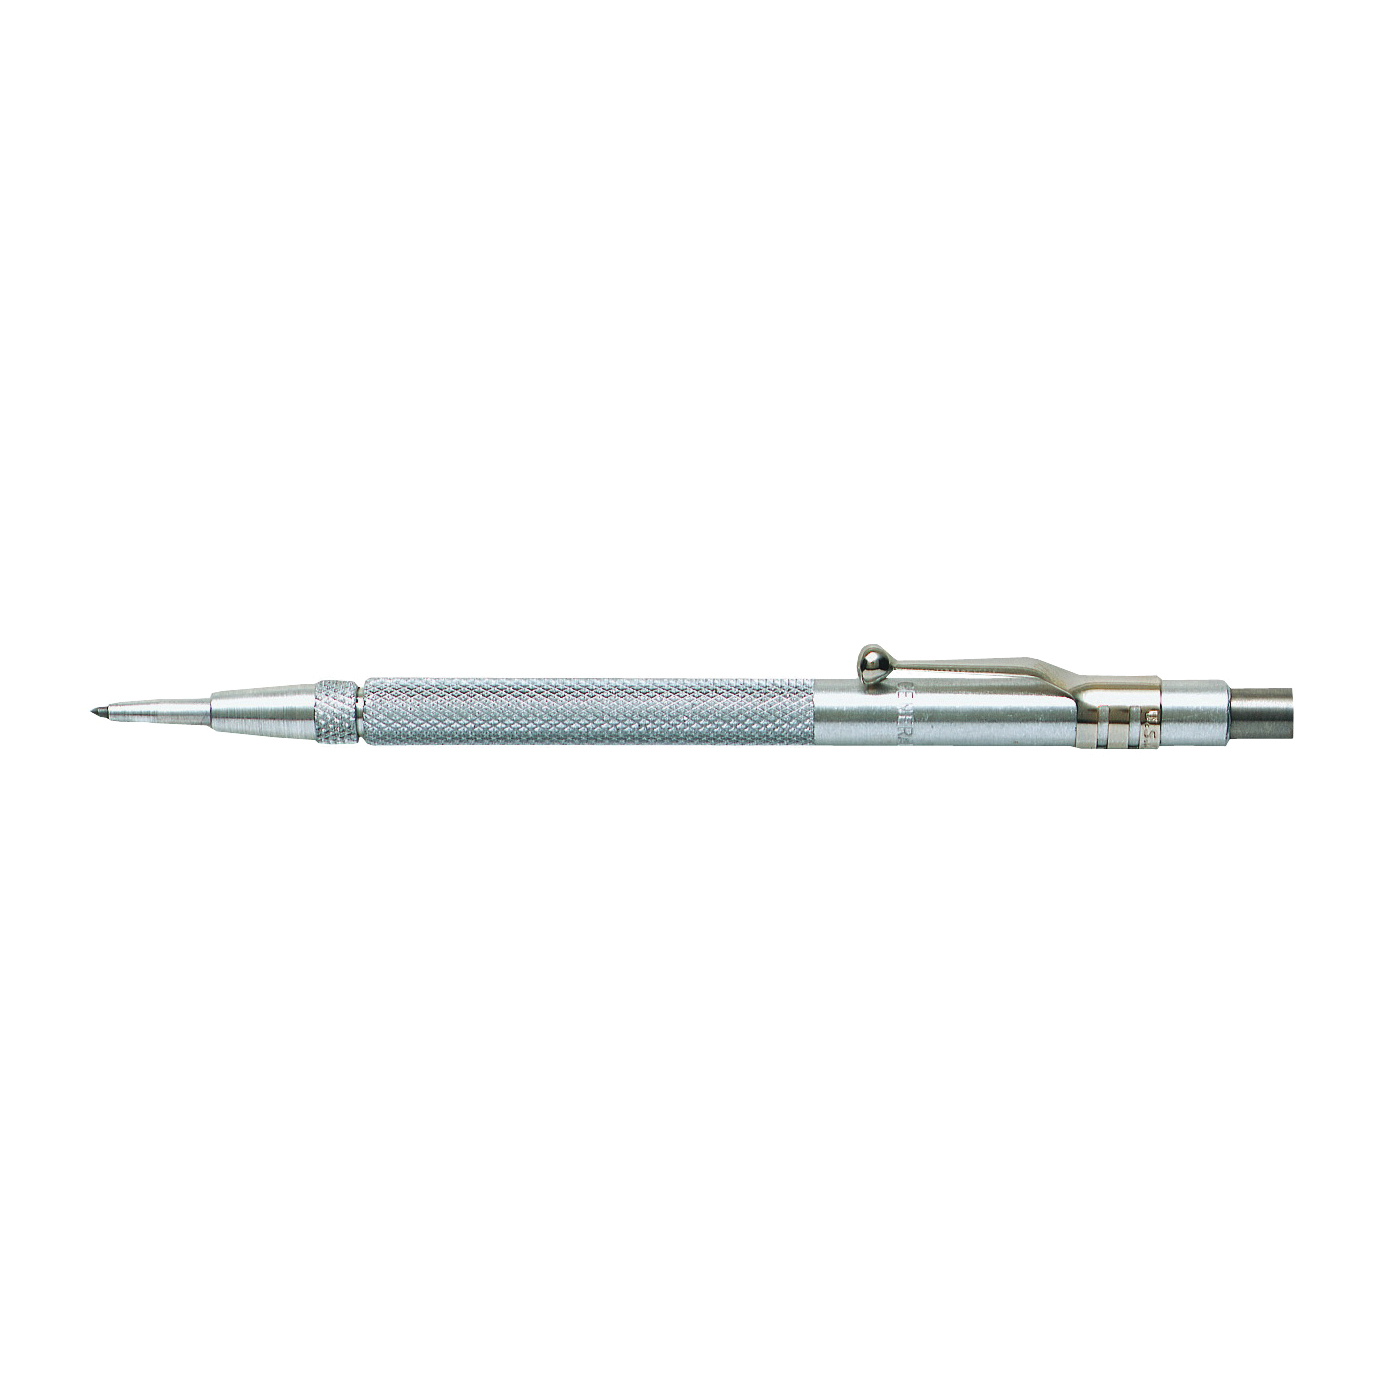 General 88CM Scriber/Etching Pen with Magnet, Straight Ti